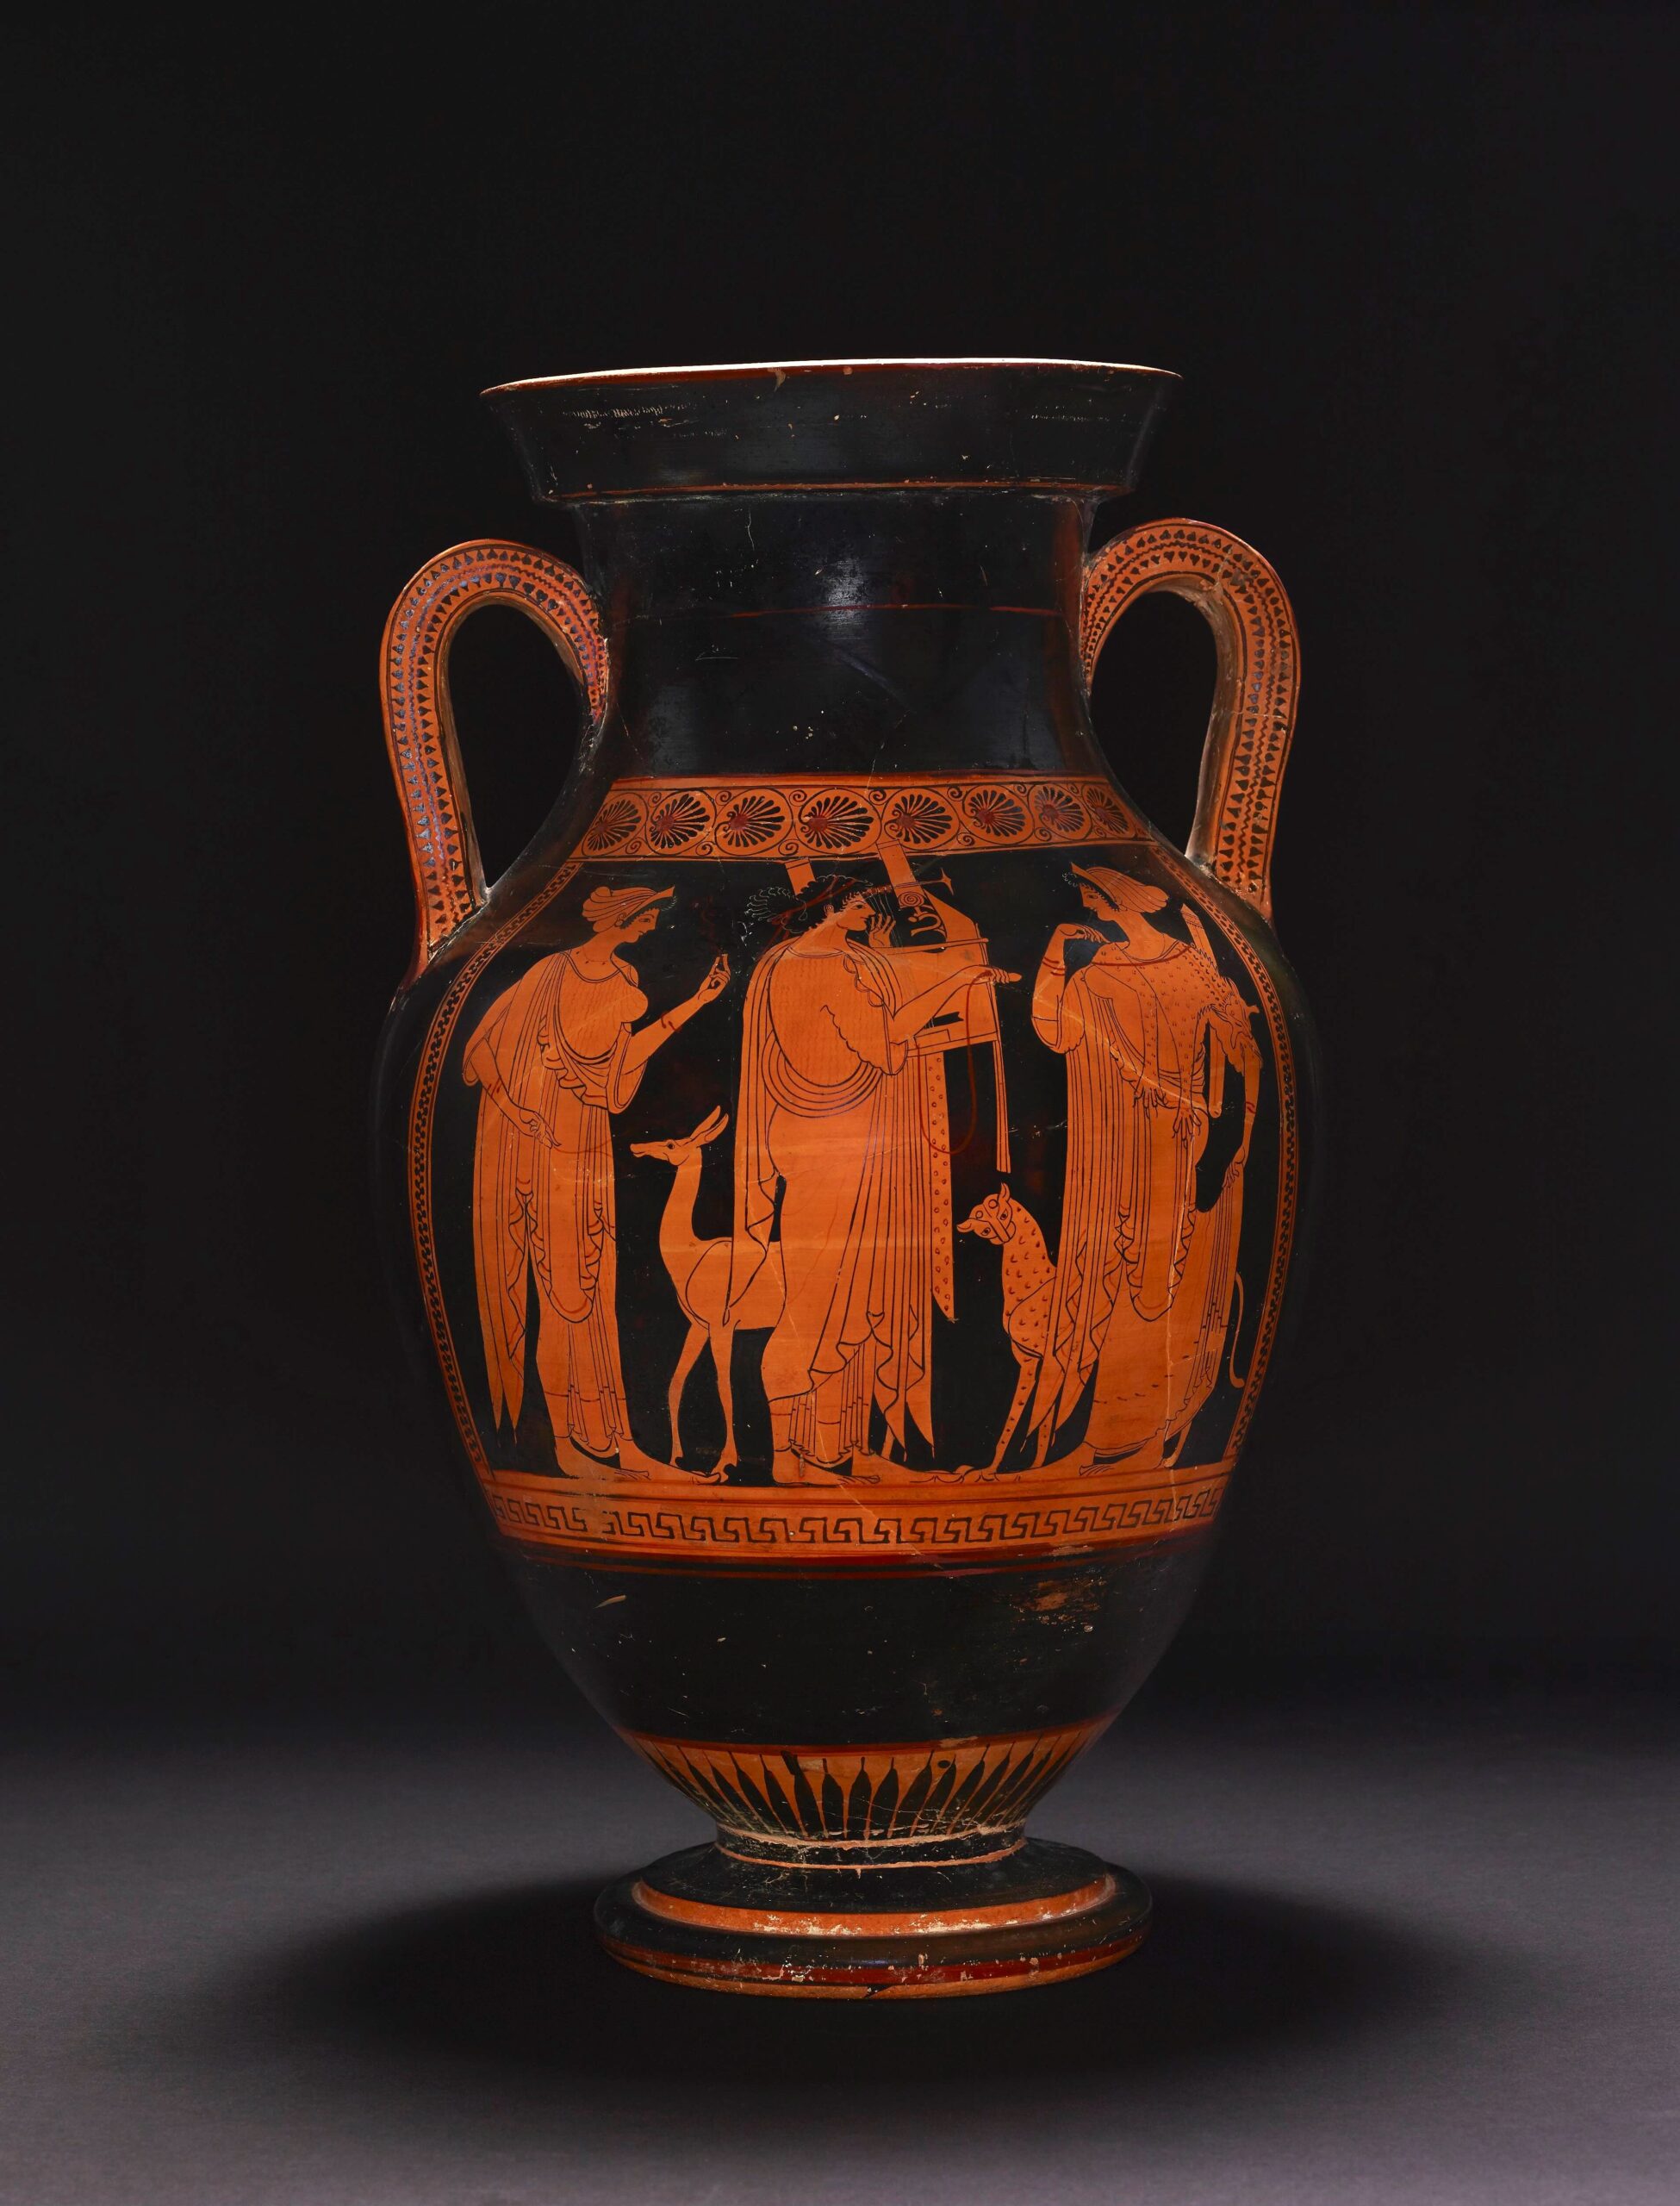 Greek vase with painted images of Apollo, Artemis, and Leto